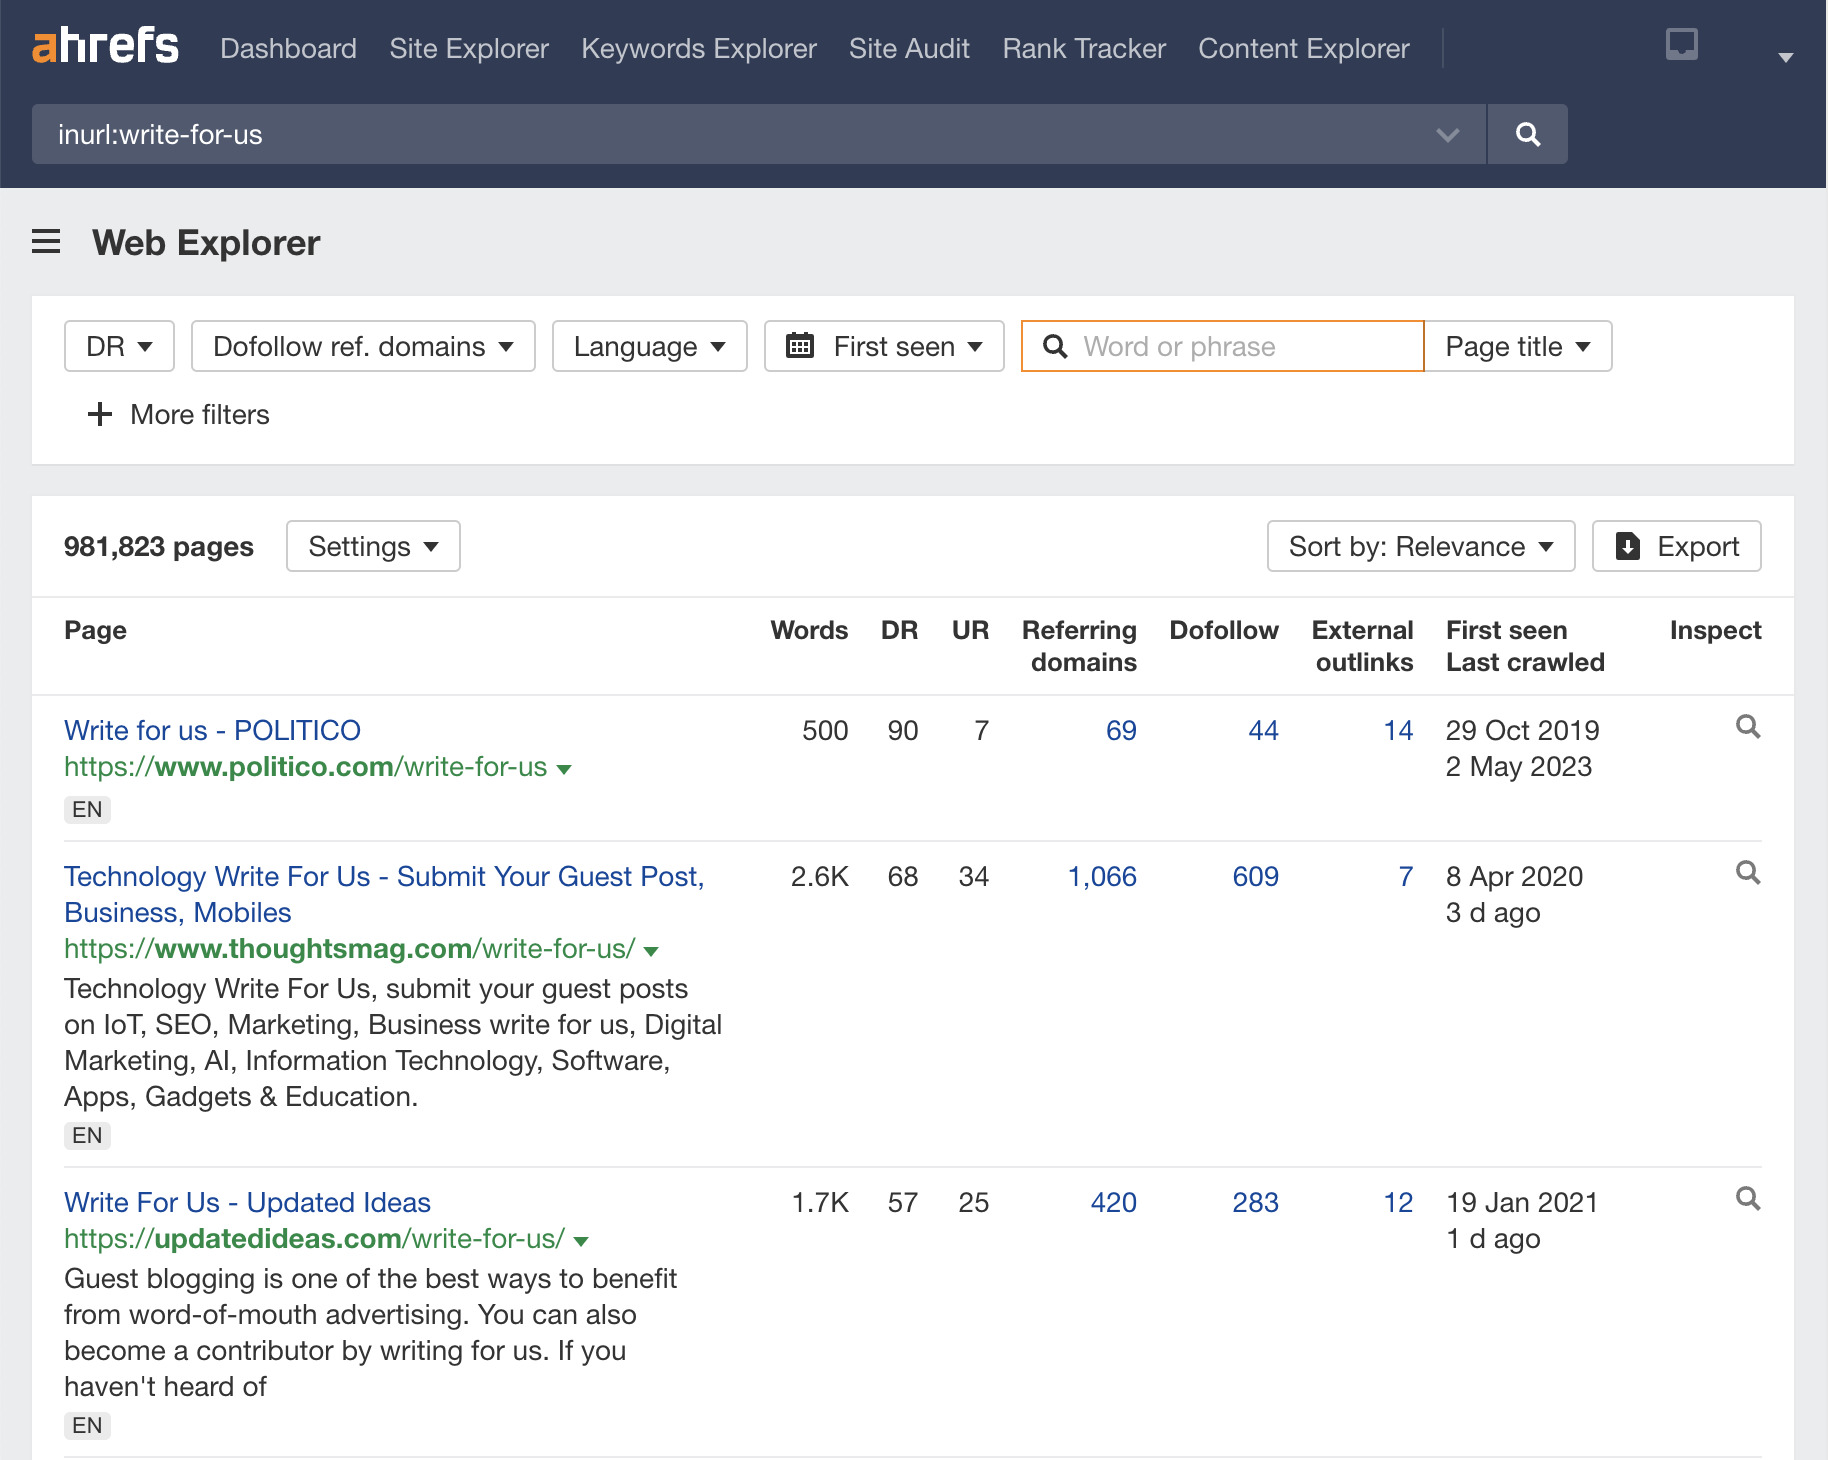 Search operator used to find websites asking for guest contributors, via Ahrefs' Web Explorer
